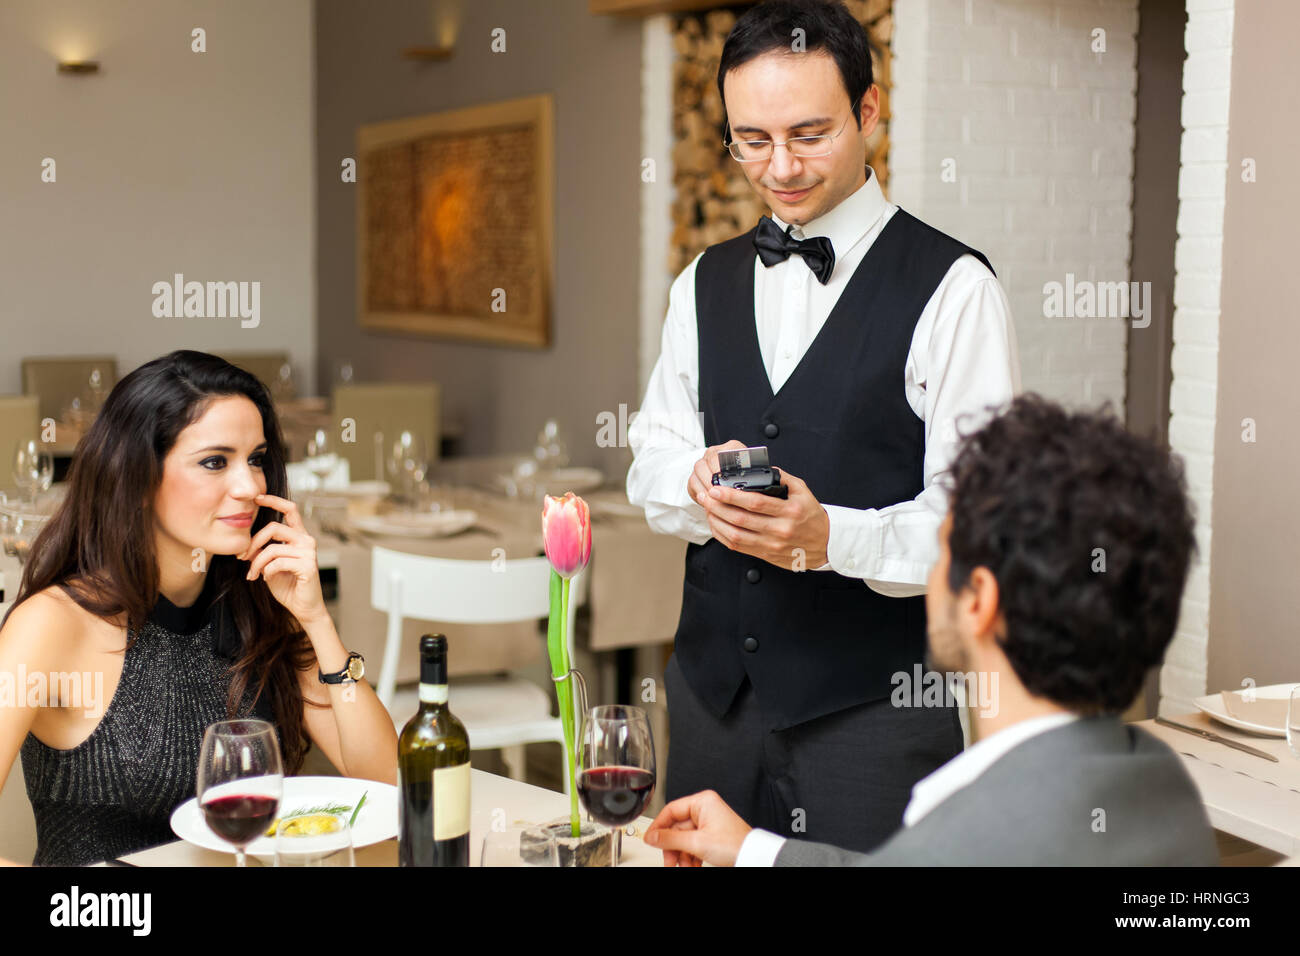 Waiter taking orders in a restaurant Stock Photo